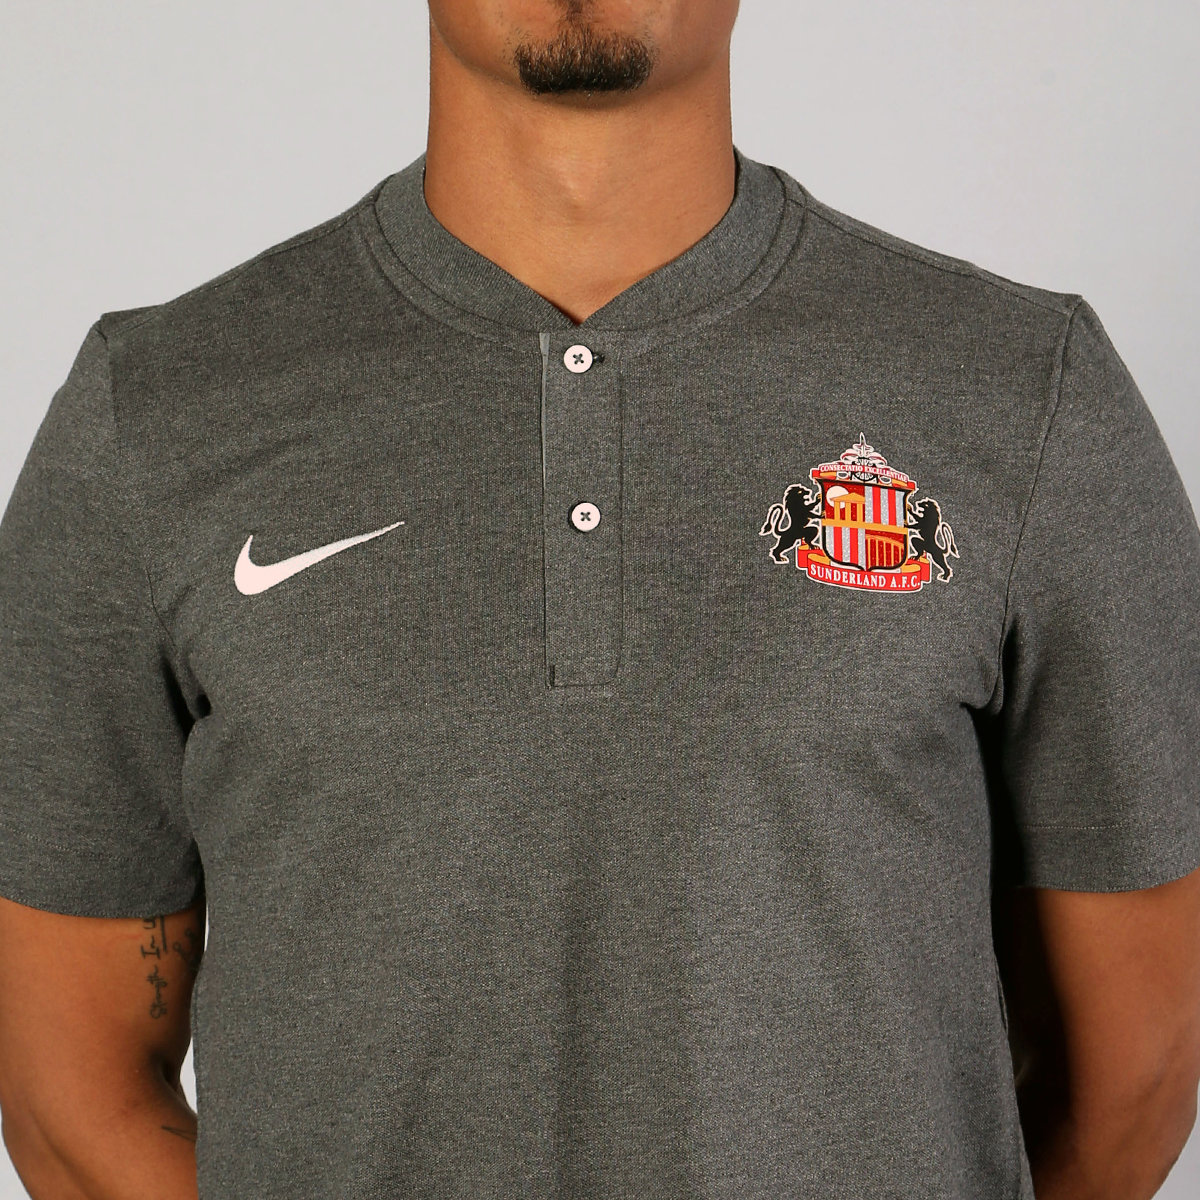 Buy the 21-22 Nike Travel Polo online at Sunderland AFC Store